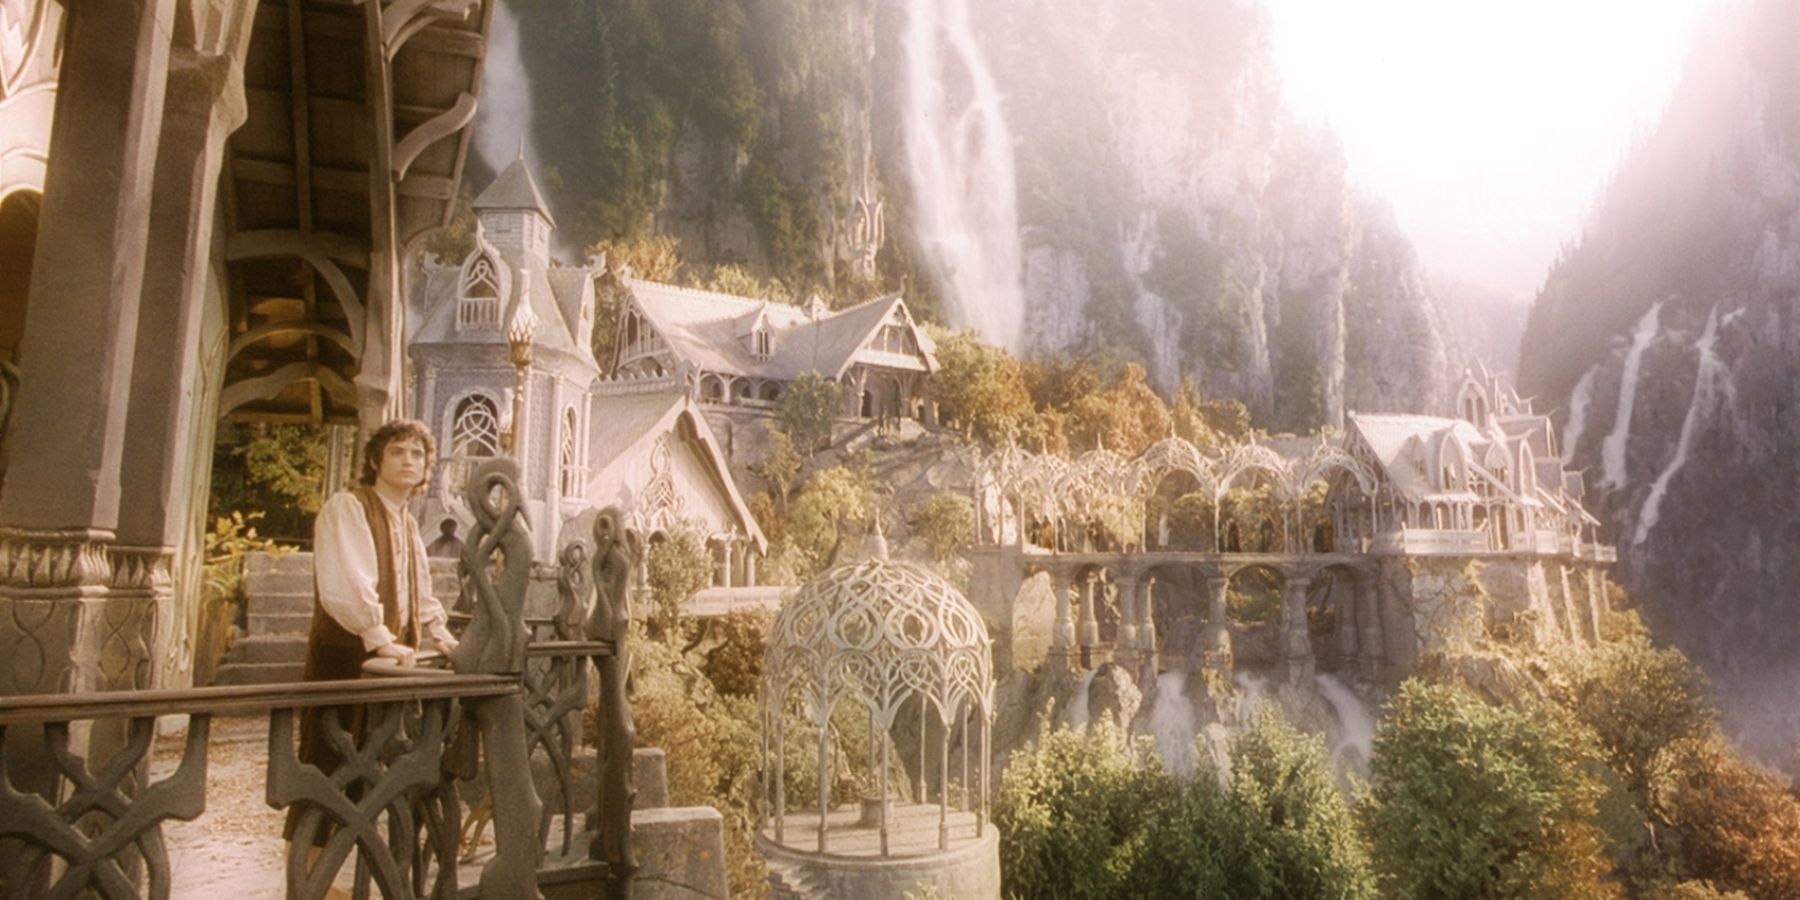 Frodo brings the ring to Rivendell